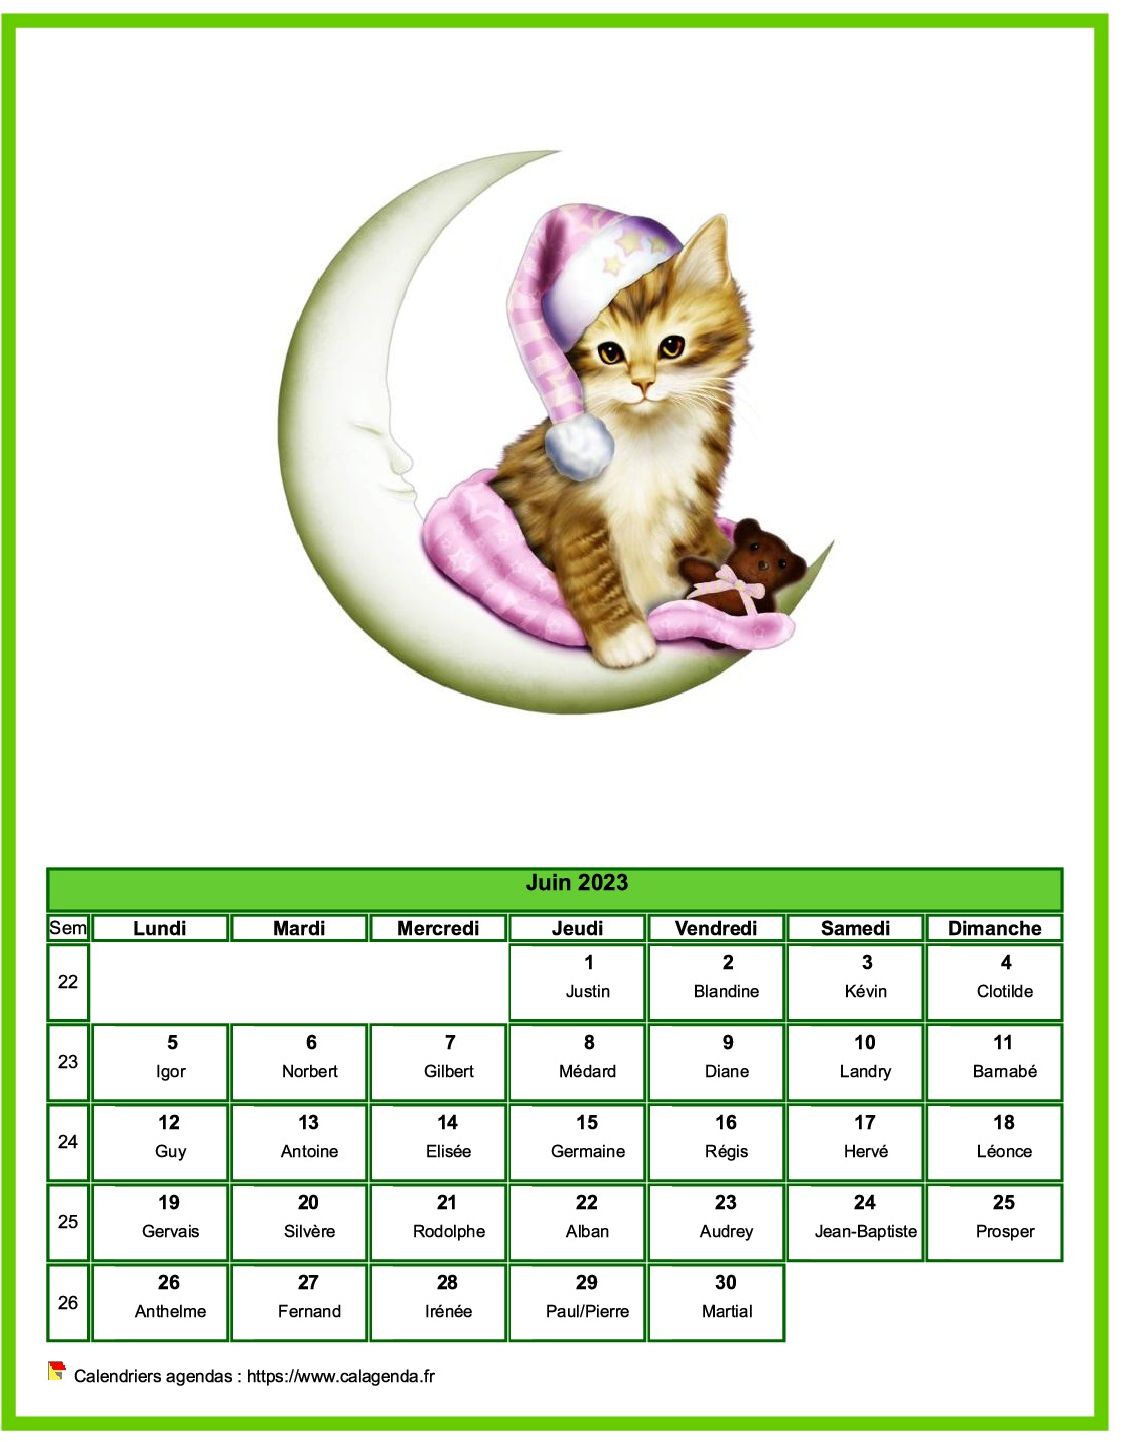 Calendrier juin 2023 chats